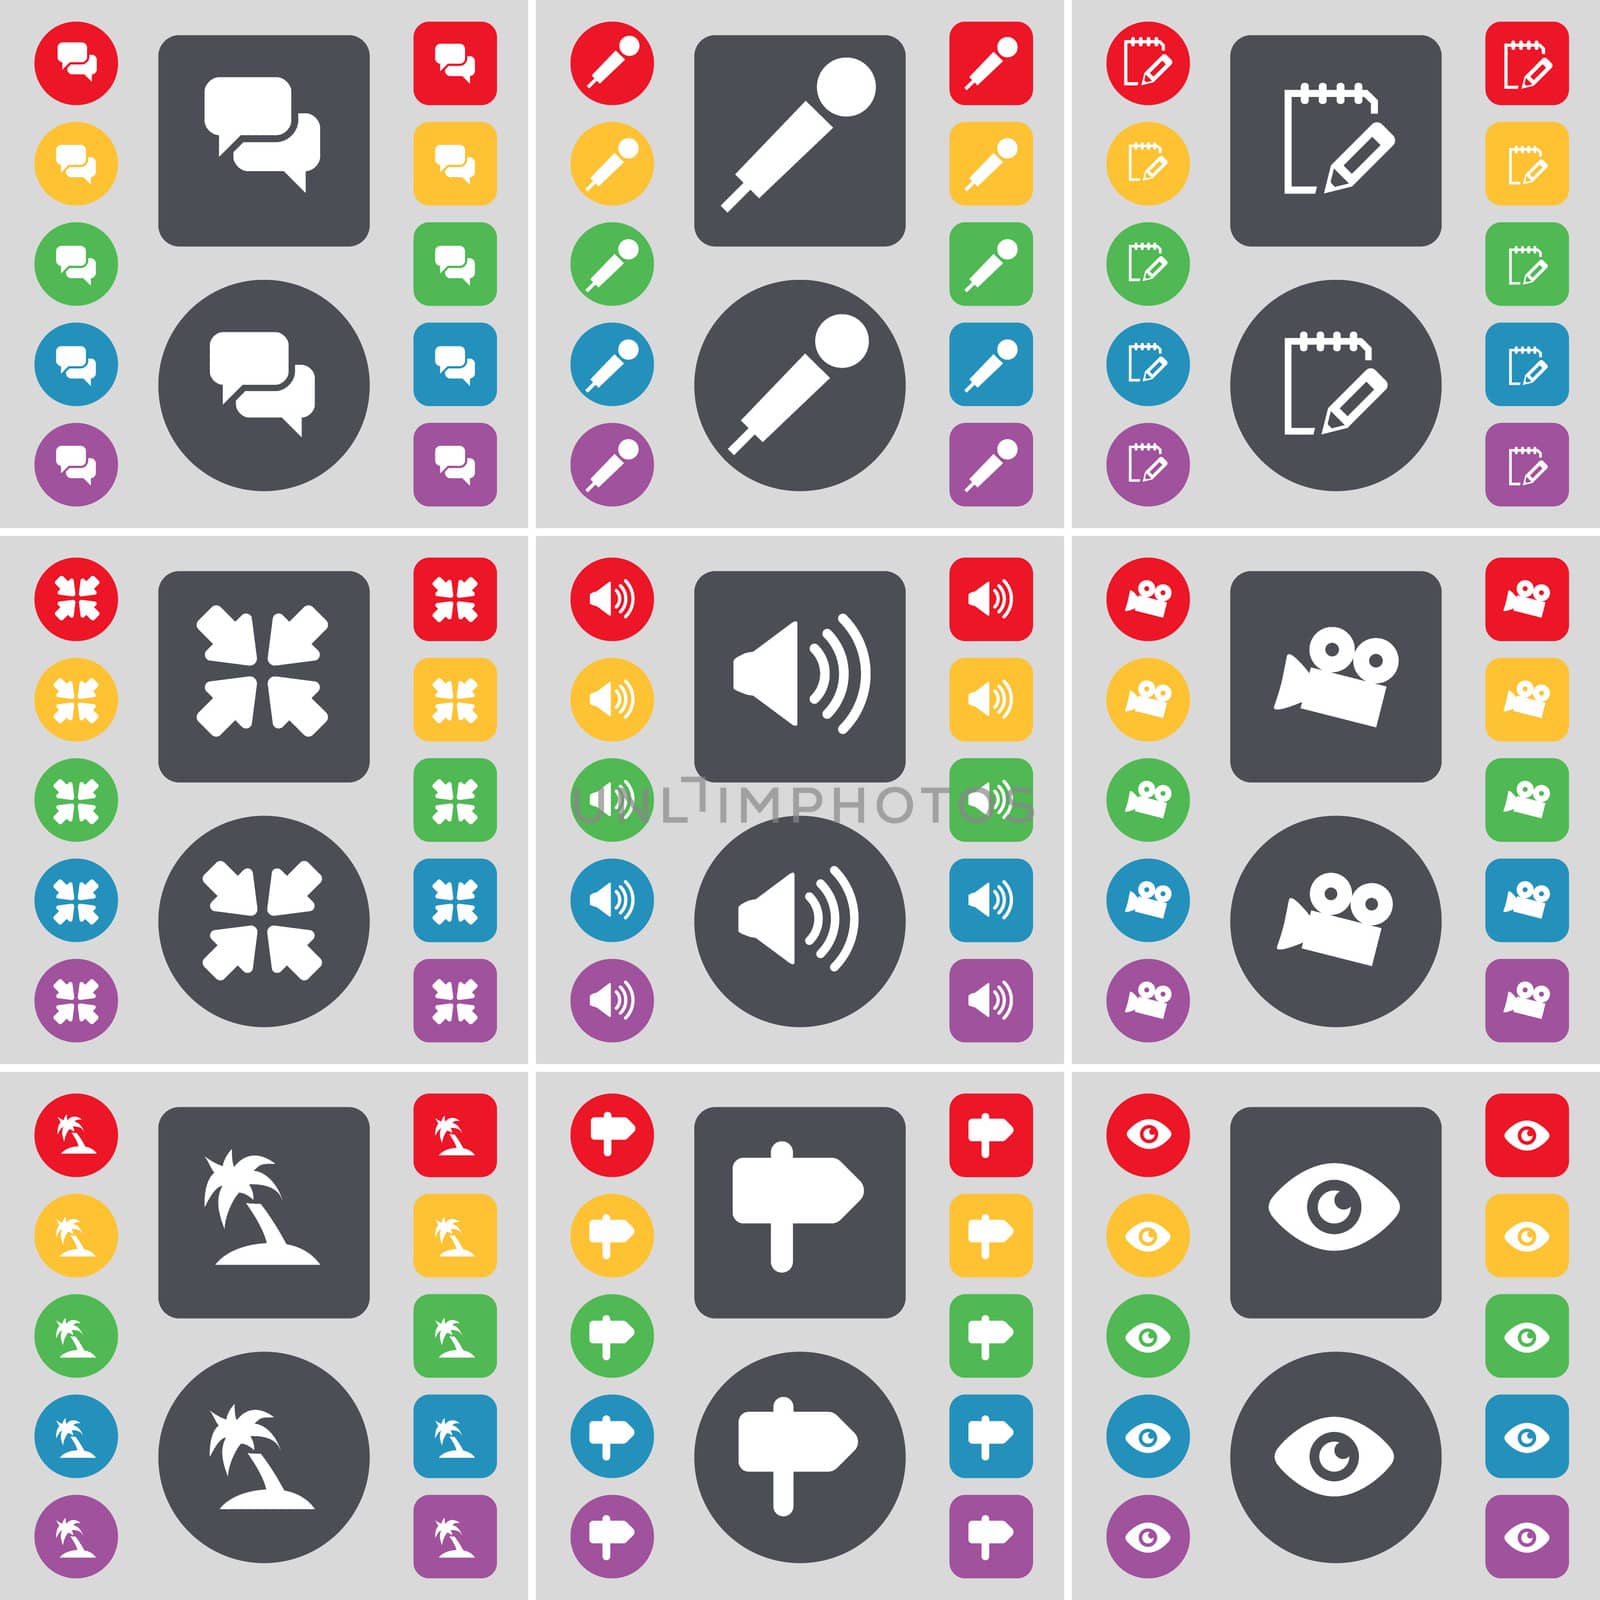 Chat, Microphone, Survey, Deploying screen, Sound, Film camera, Palm, Sighpost, Vision icon symbol. A large set of flat, colored buttons for your design. illustration